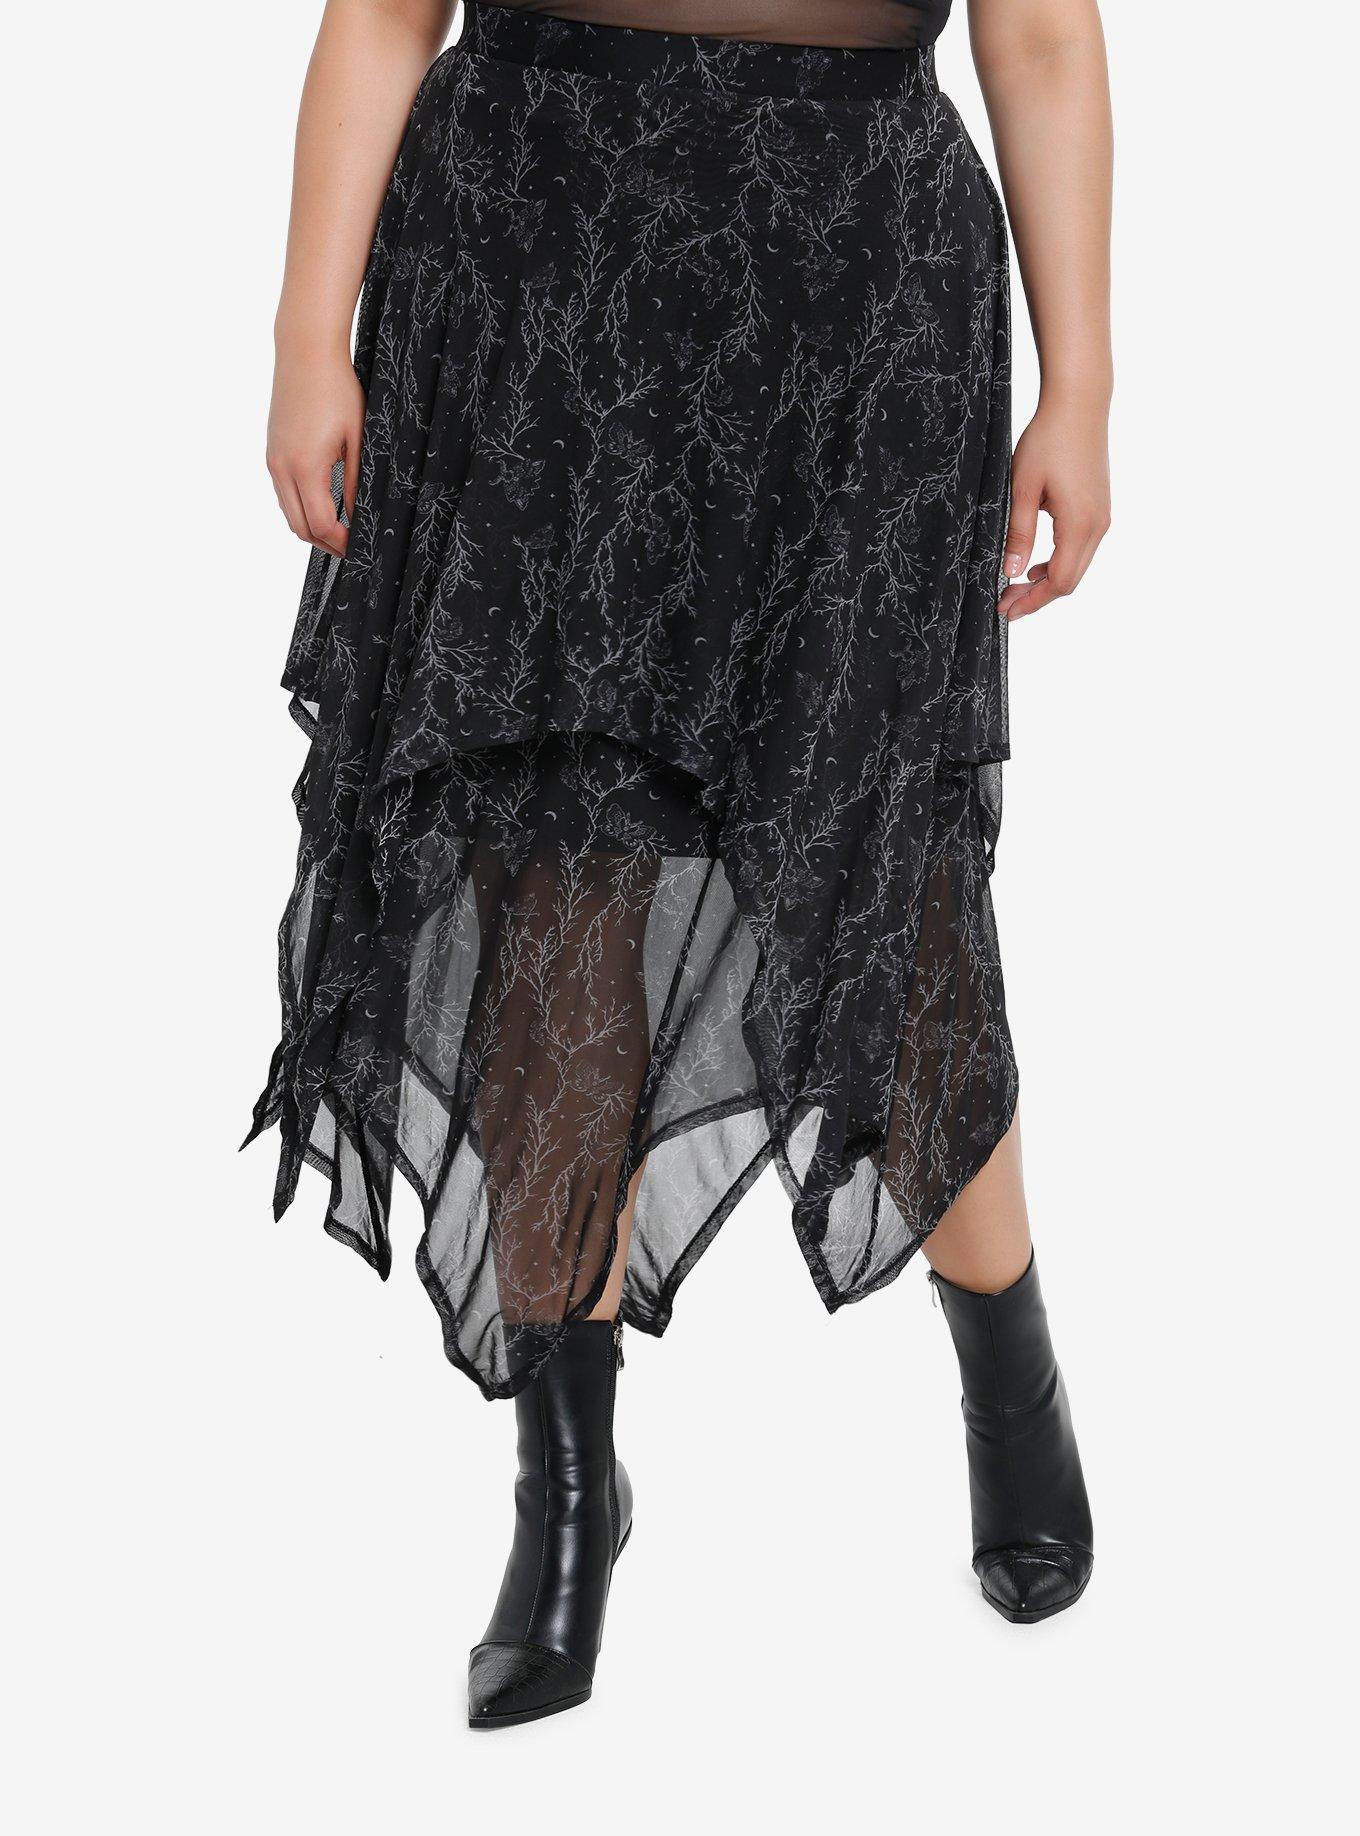 Cosmic Aura Moths & Branches Tiered Mesh Skirt Plus Size, BLACK, hi-res